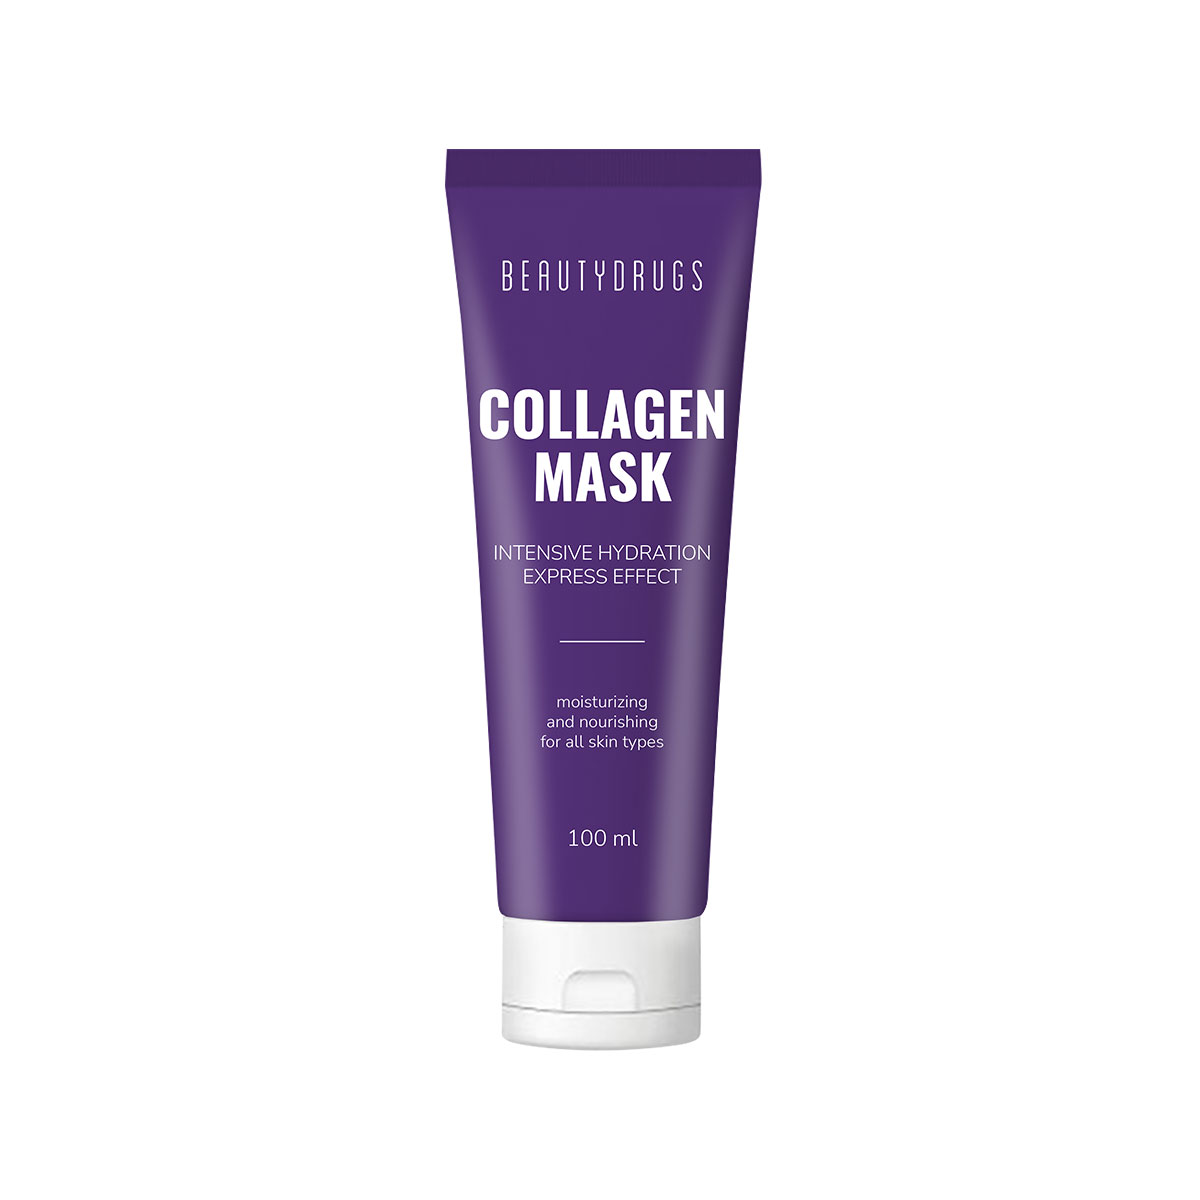 Beautydrugs     Collagen Mask Intensive Hydration Instant Effect